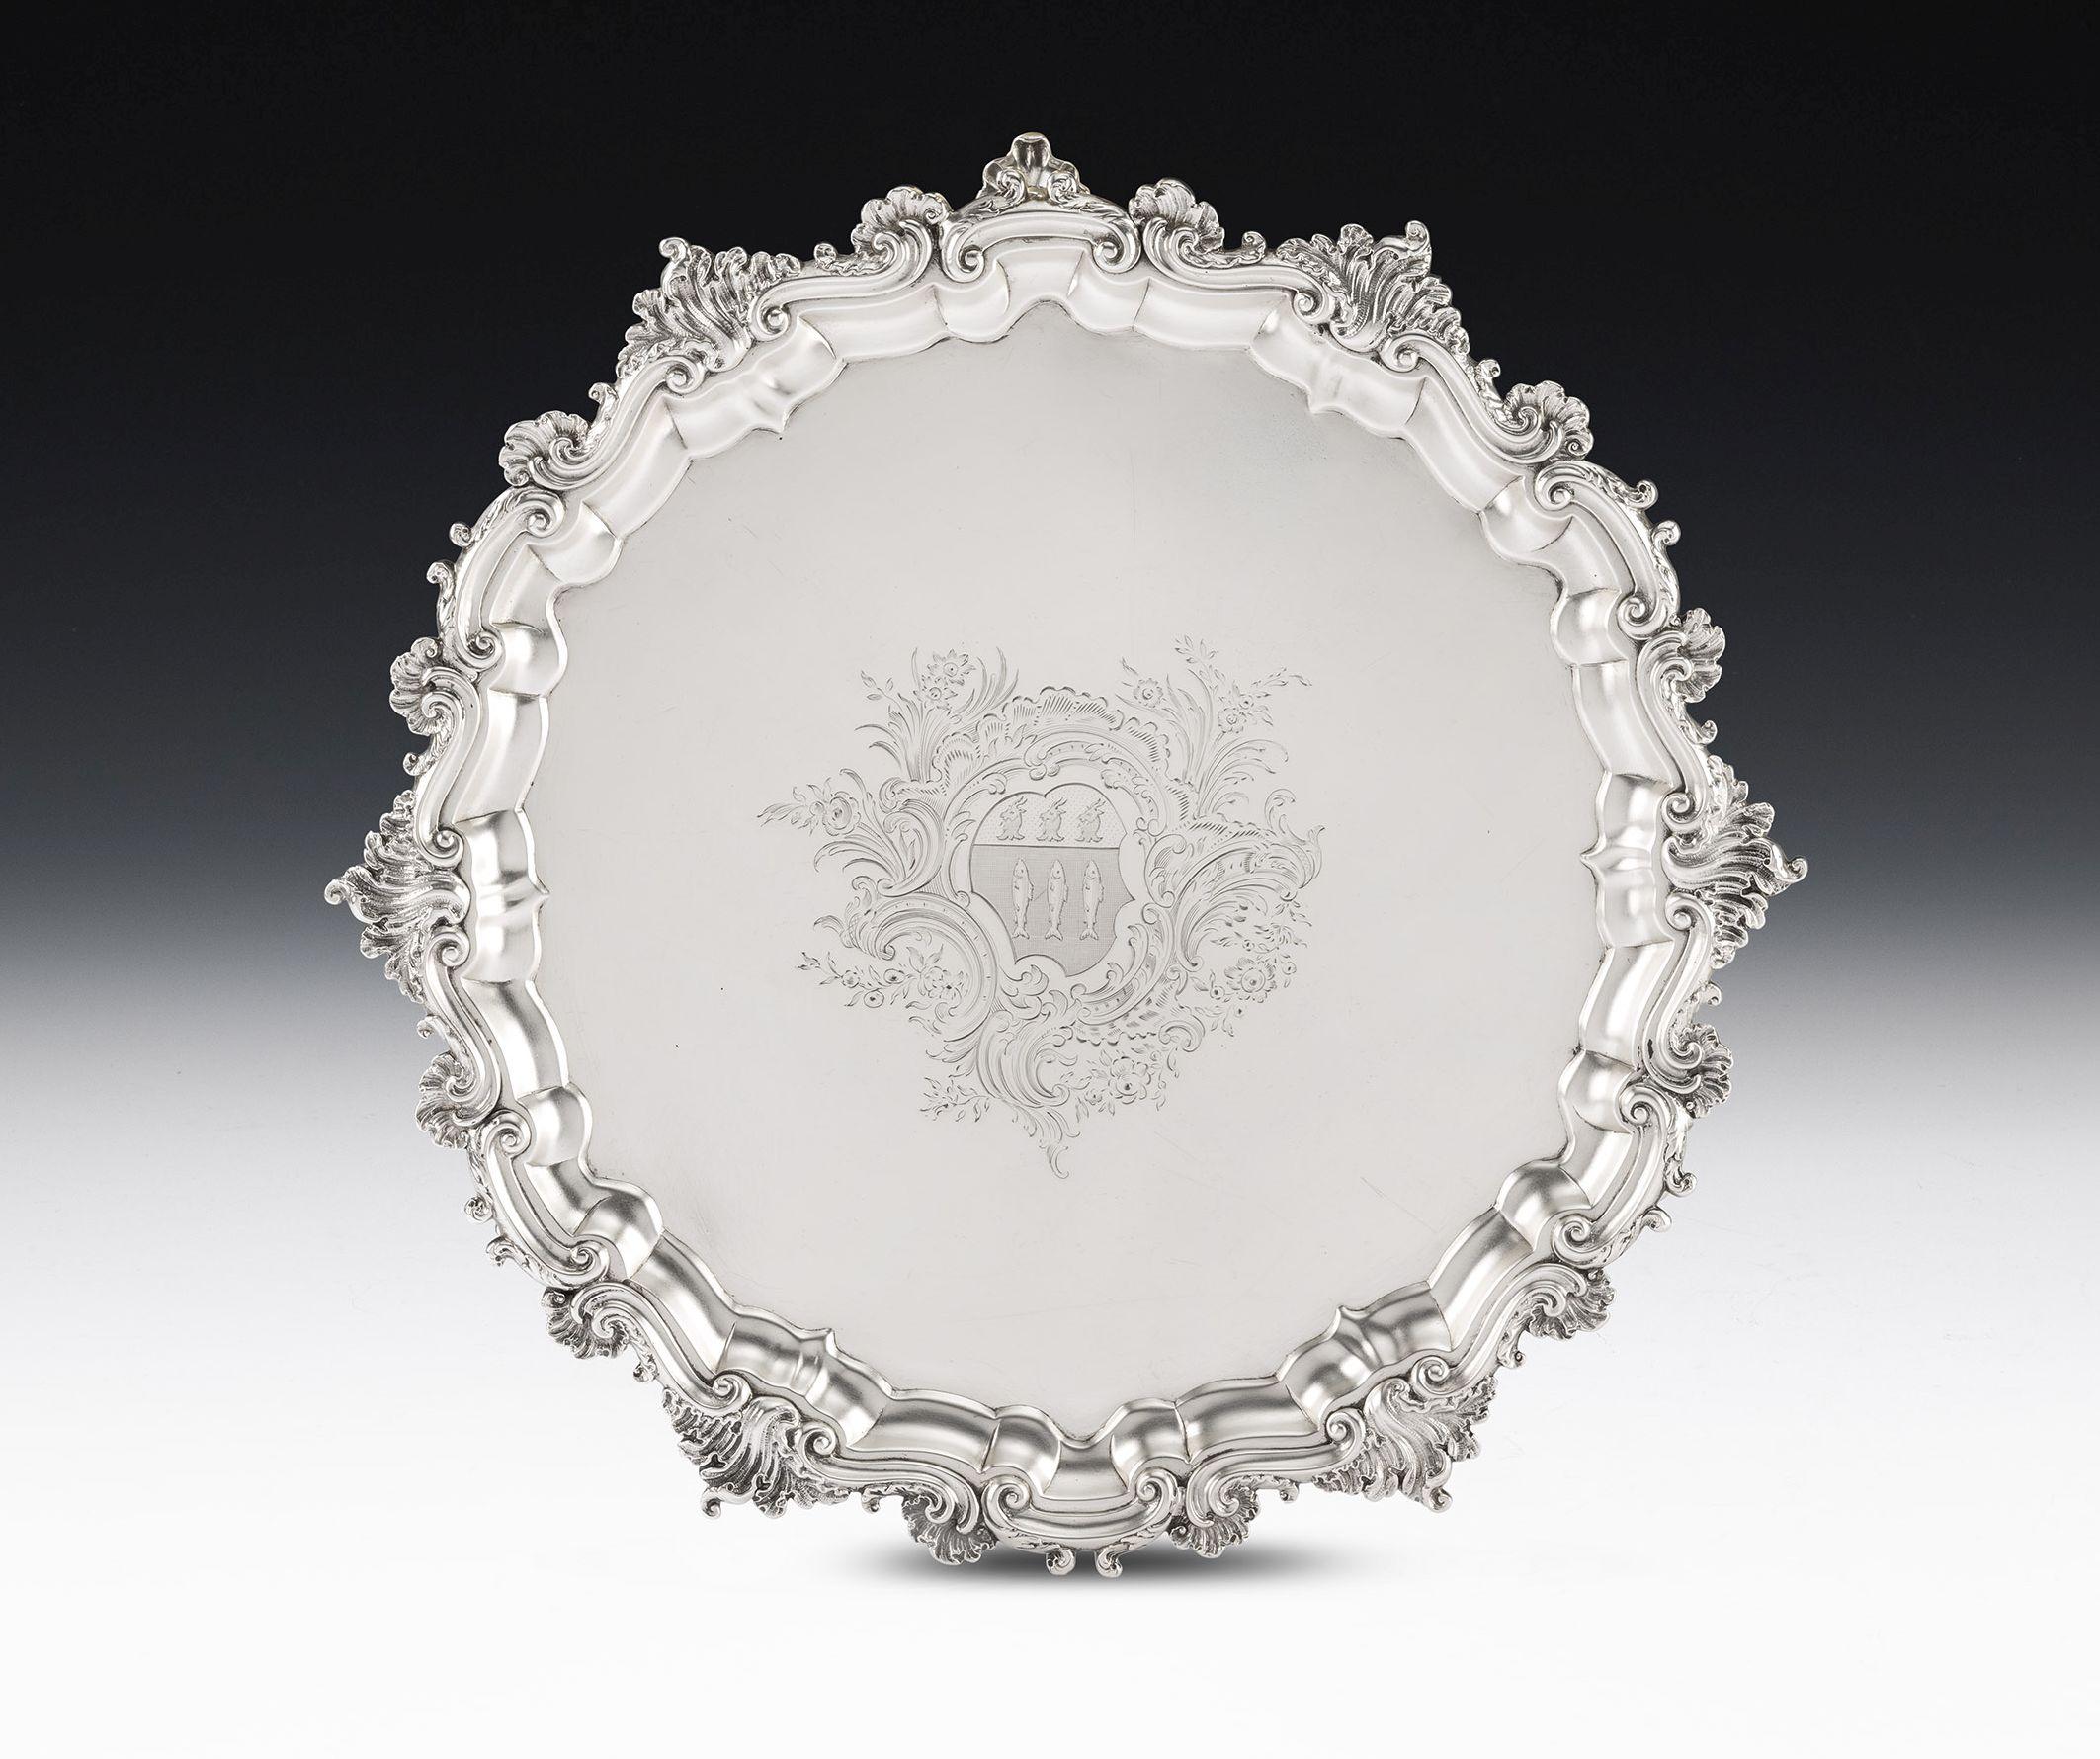 The Salver stands on three substantial raying shell feet with leaf capped scroll legs above. The main body has a raised shaped scroll rim with cast Rococo shells attached, flanked by foliate motifs. The centre is beautifully engraved with a